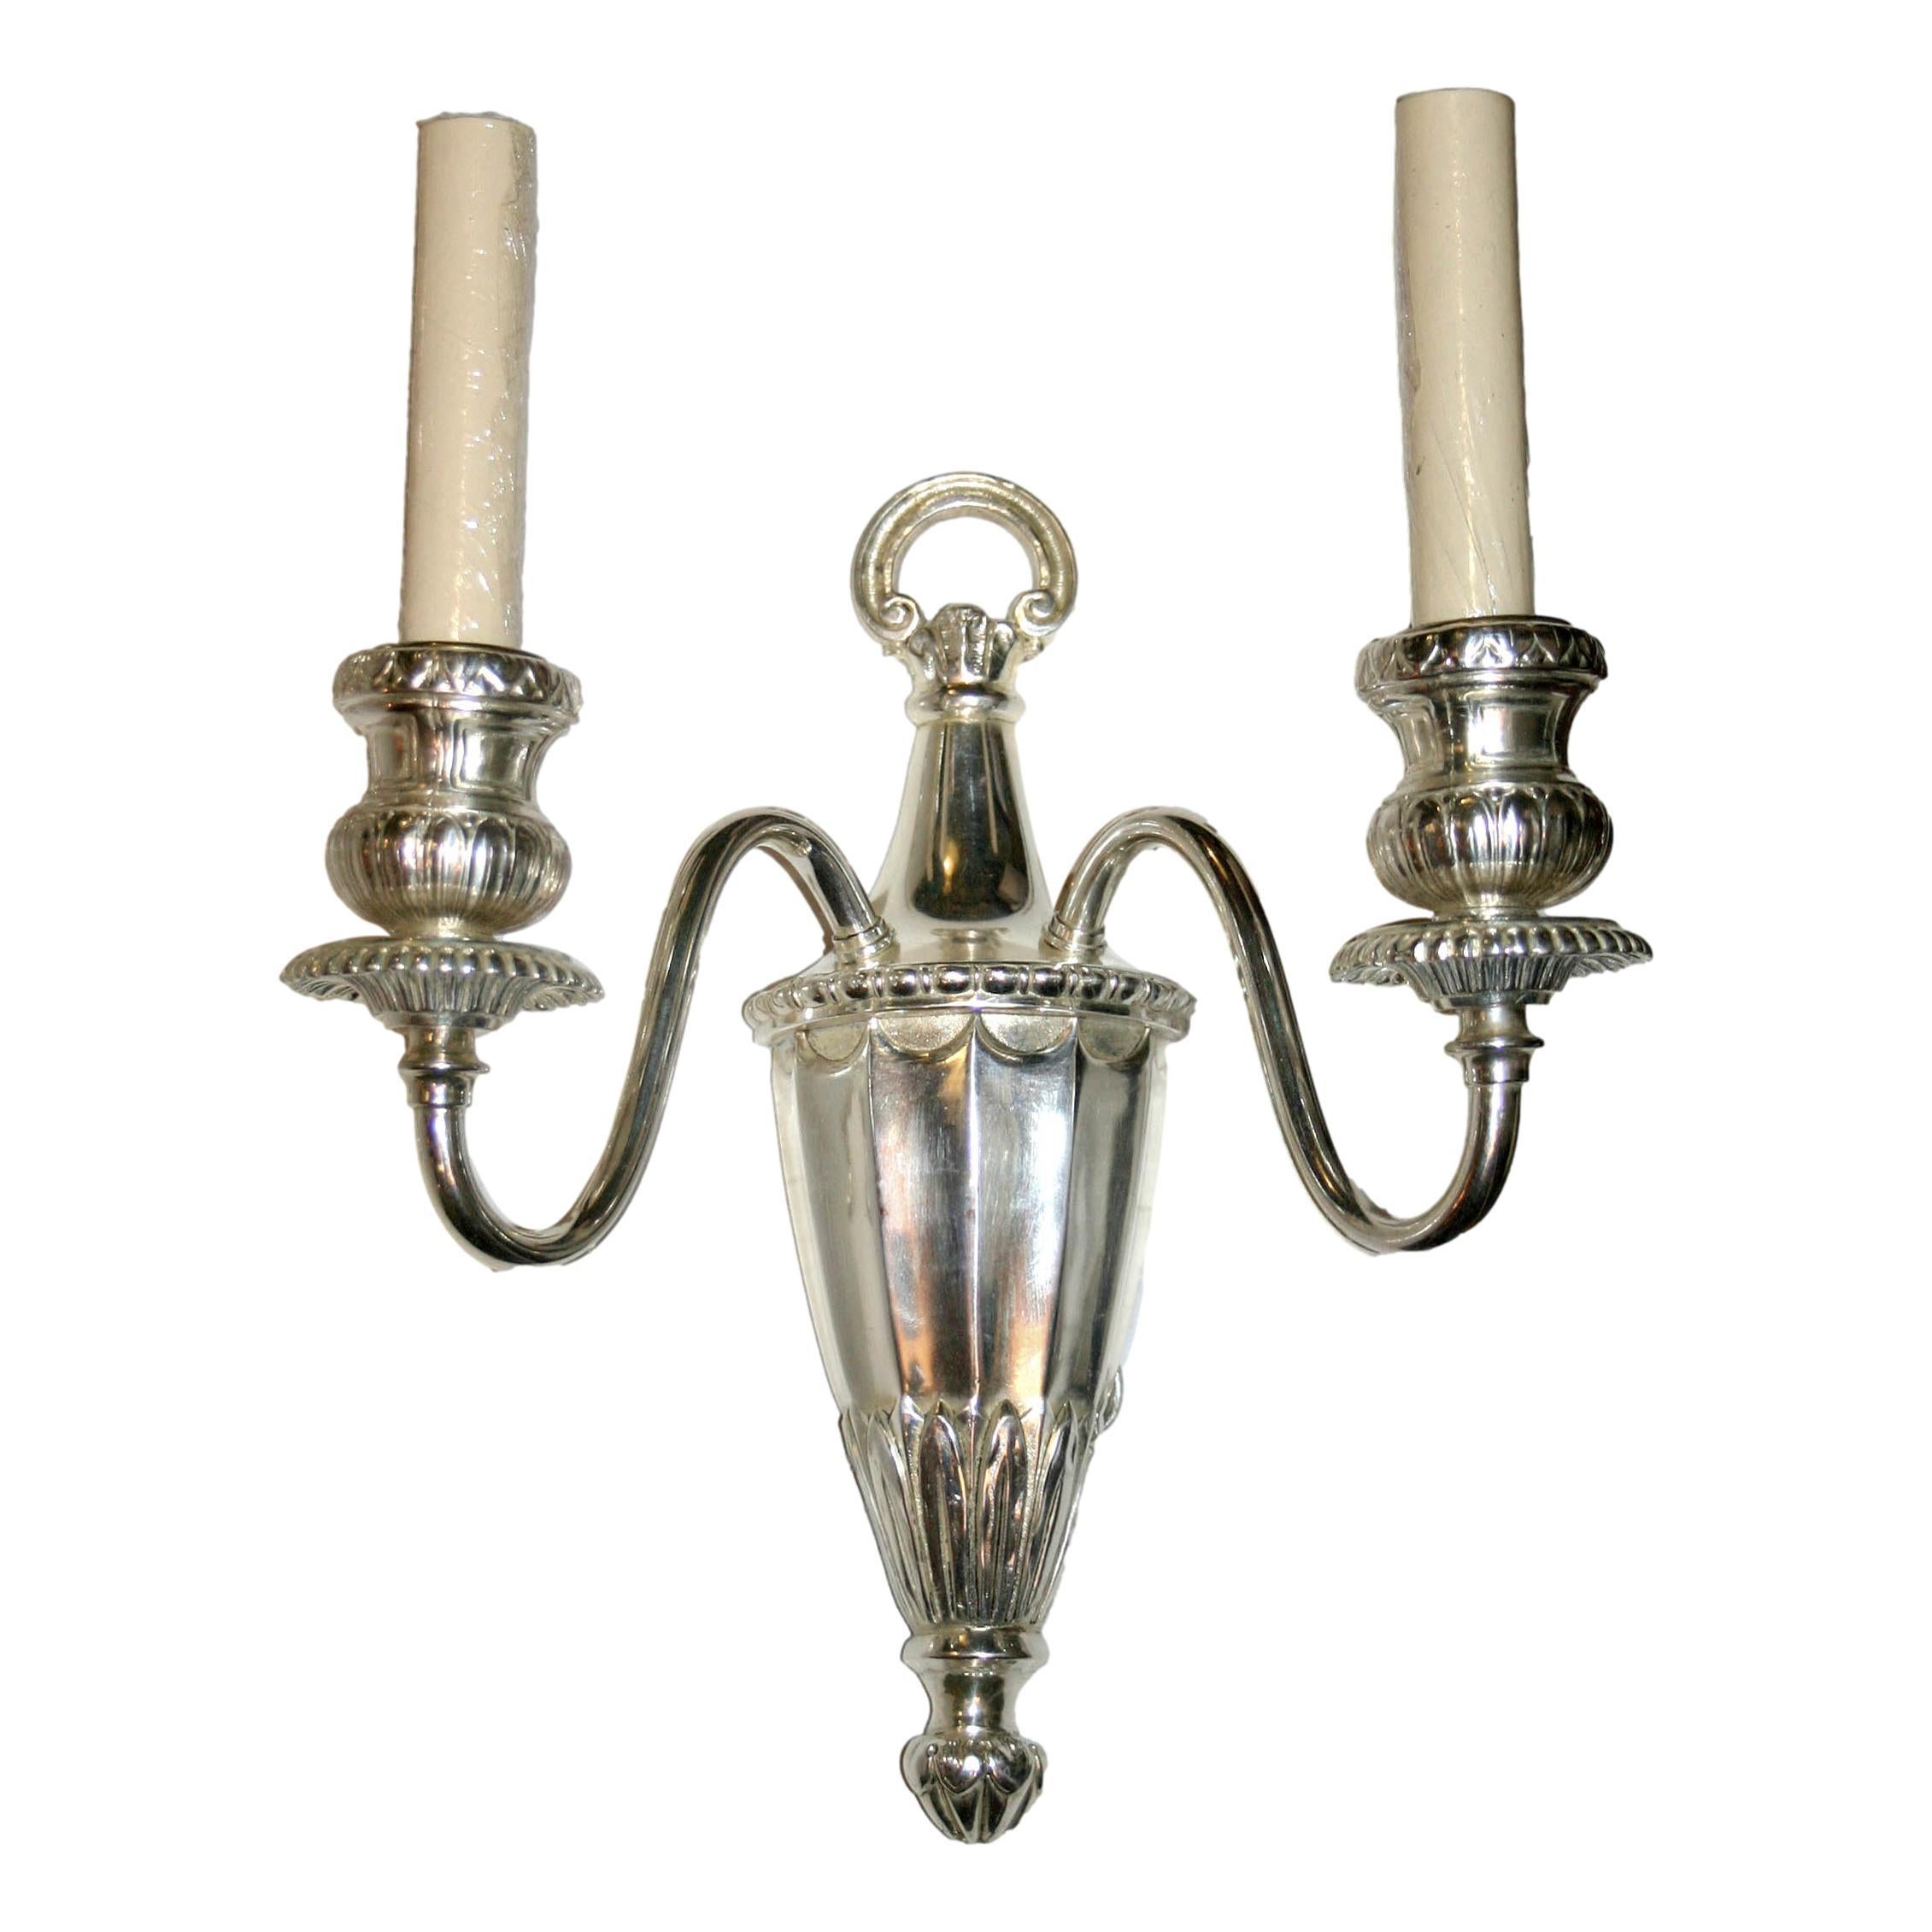 Pair of circa 1920's American two-arm neoclassic style silver-plated sconces.

Measurements:
Height: 14